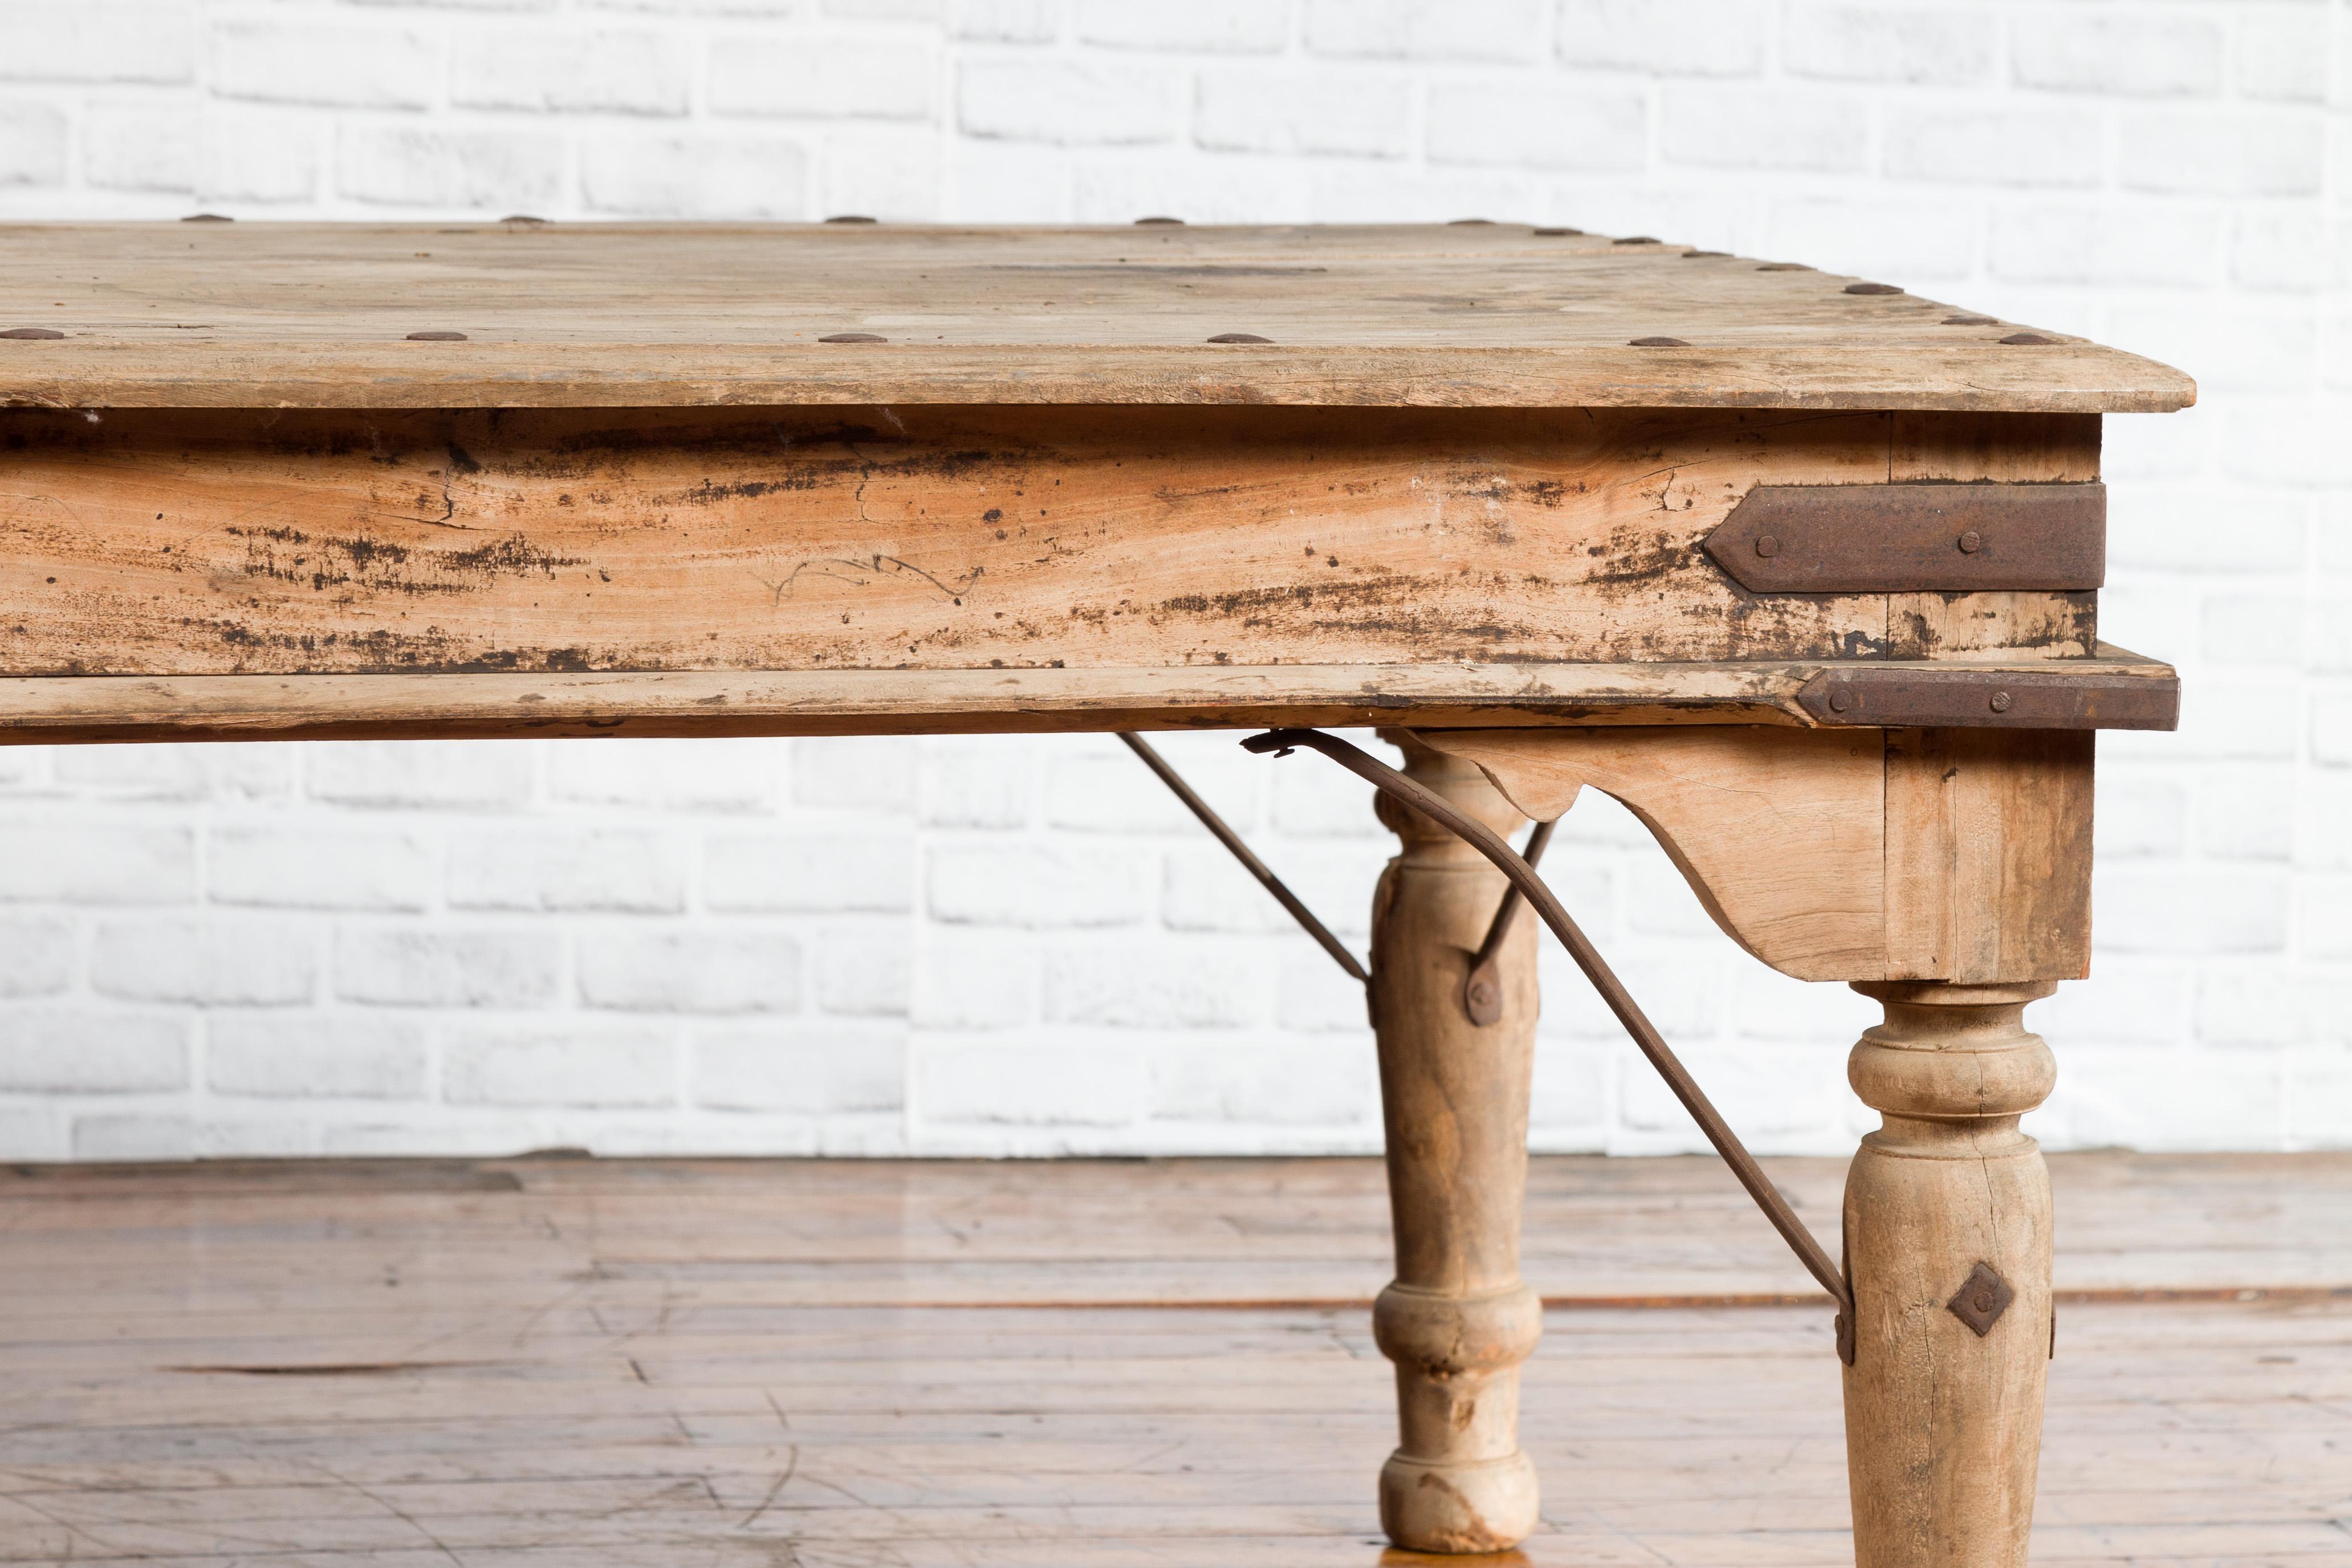 Rustic Indian Low Table with Distressed Patina, Iron Details and Baluster Legs For Sale 4